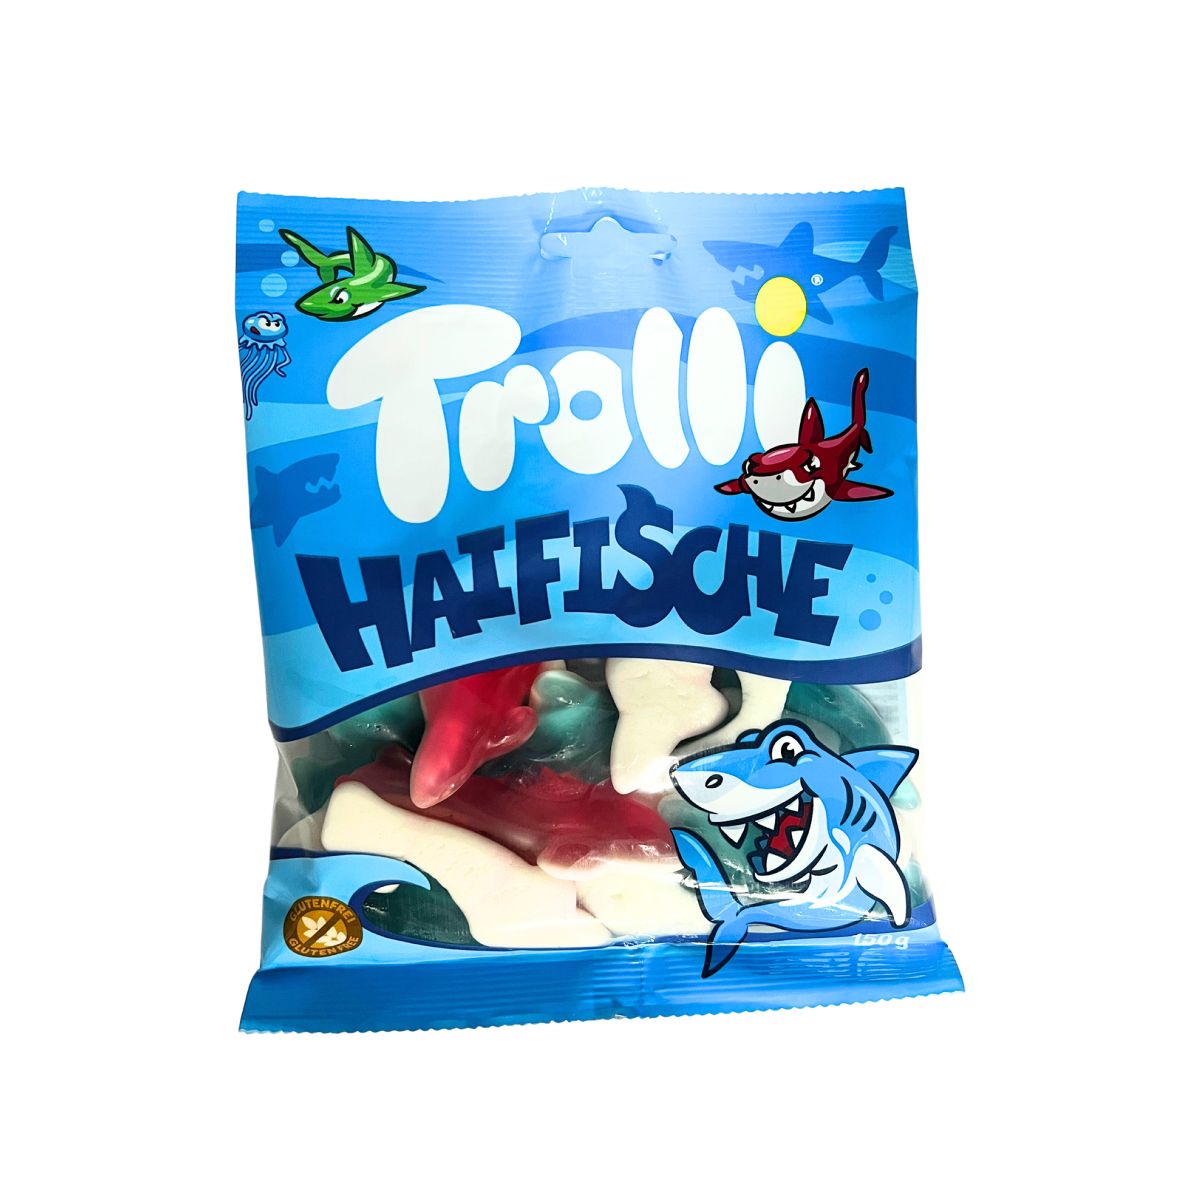 Trolli - Haifische from Germany